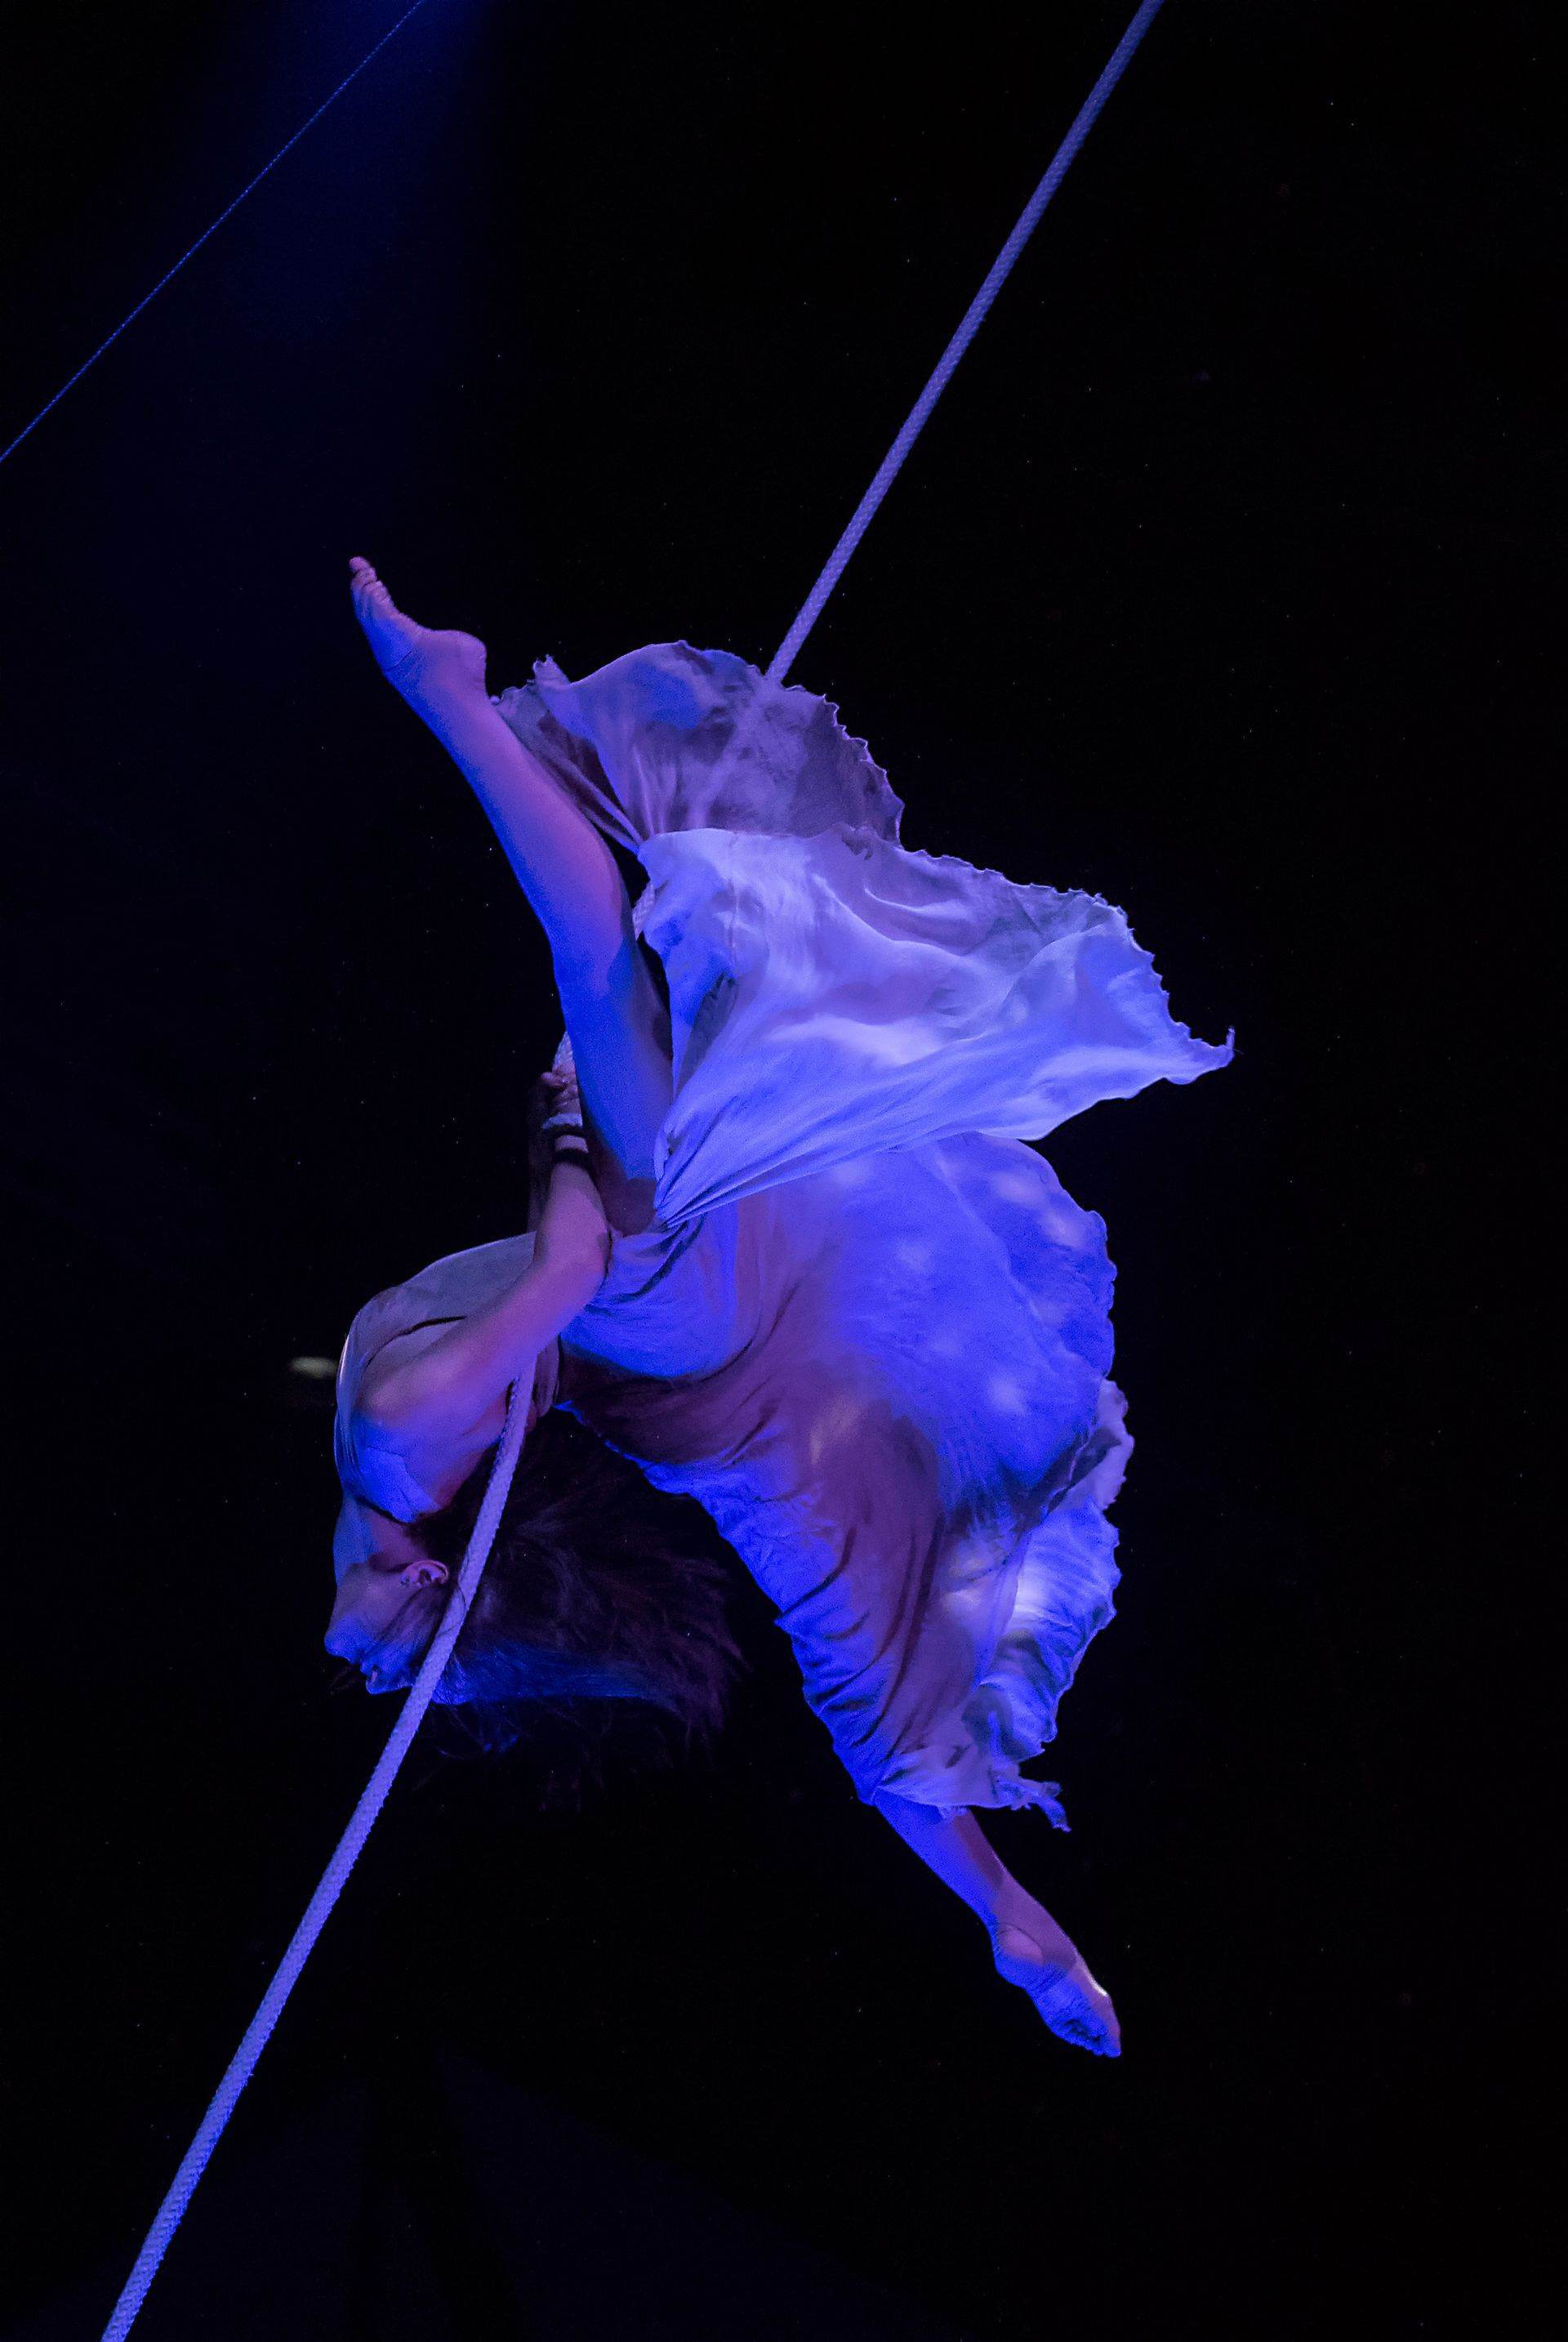 Scalada - Vision by Cirque du Soleil 2016: Aerial dance with a rope